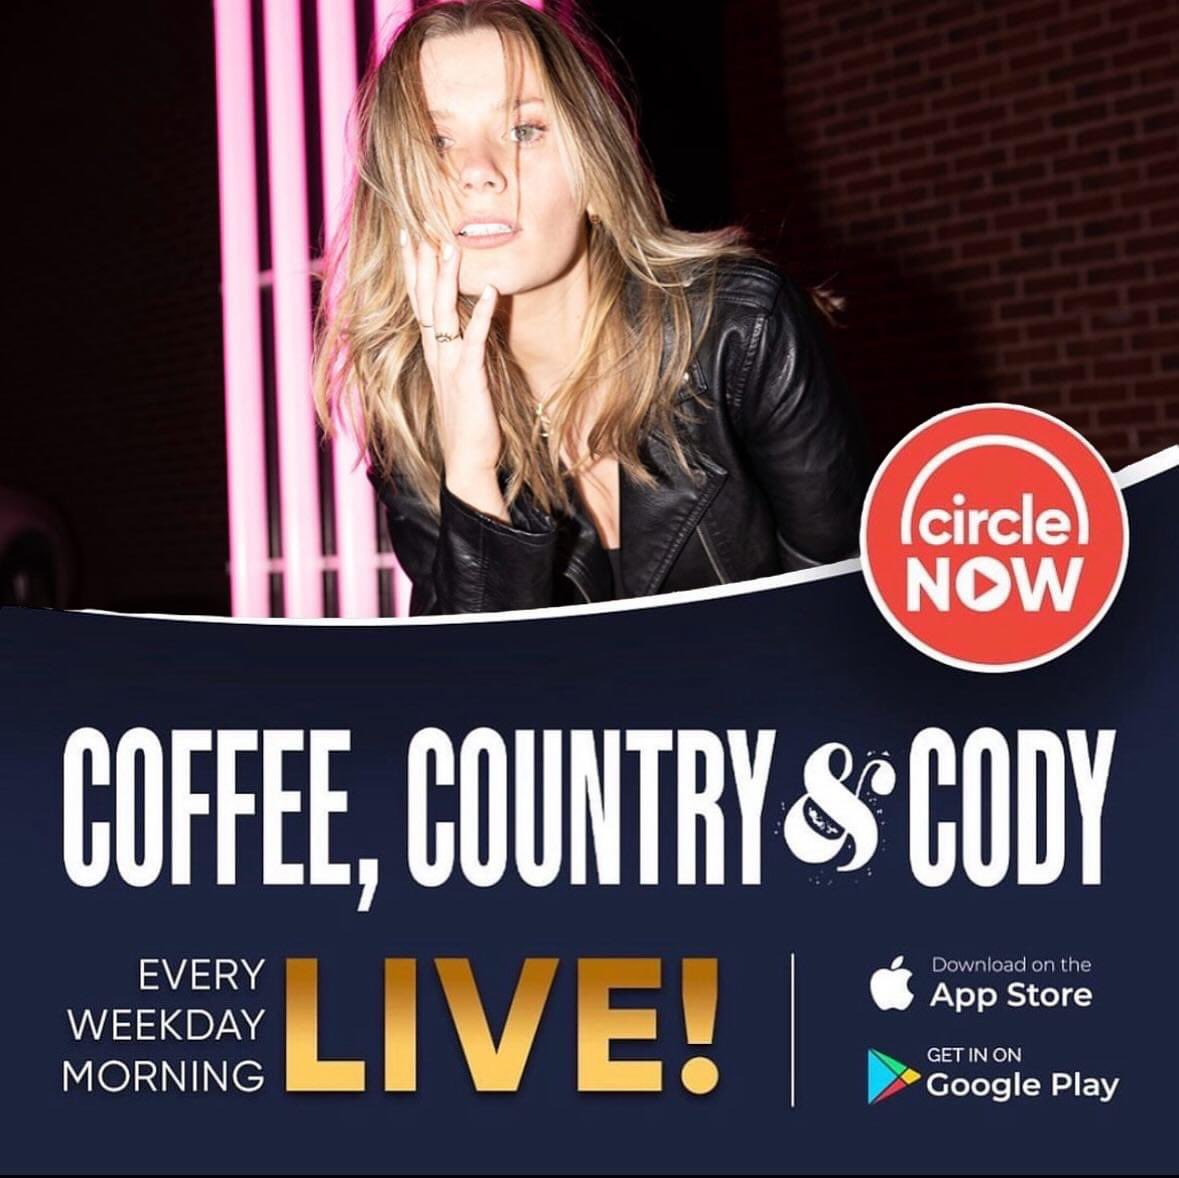 Thrilled to be back on WSM’s Coffee, Country & Cody on @opry radio on April 4th at 8am CST! 🌞☕ Join us for a chat about “Jackie” and a sneak peek of some fresh tunes! 💛🎶 ☕📺 See you bright and early! 🌅🎸 #CircleNow #CoffeeCountryCody #Opry #Nashville